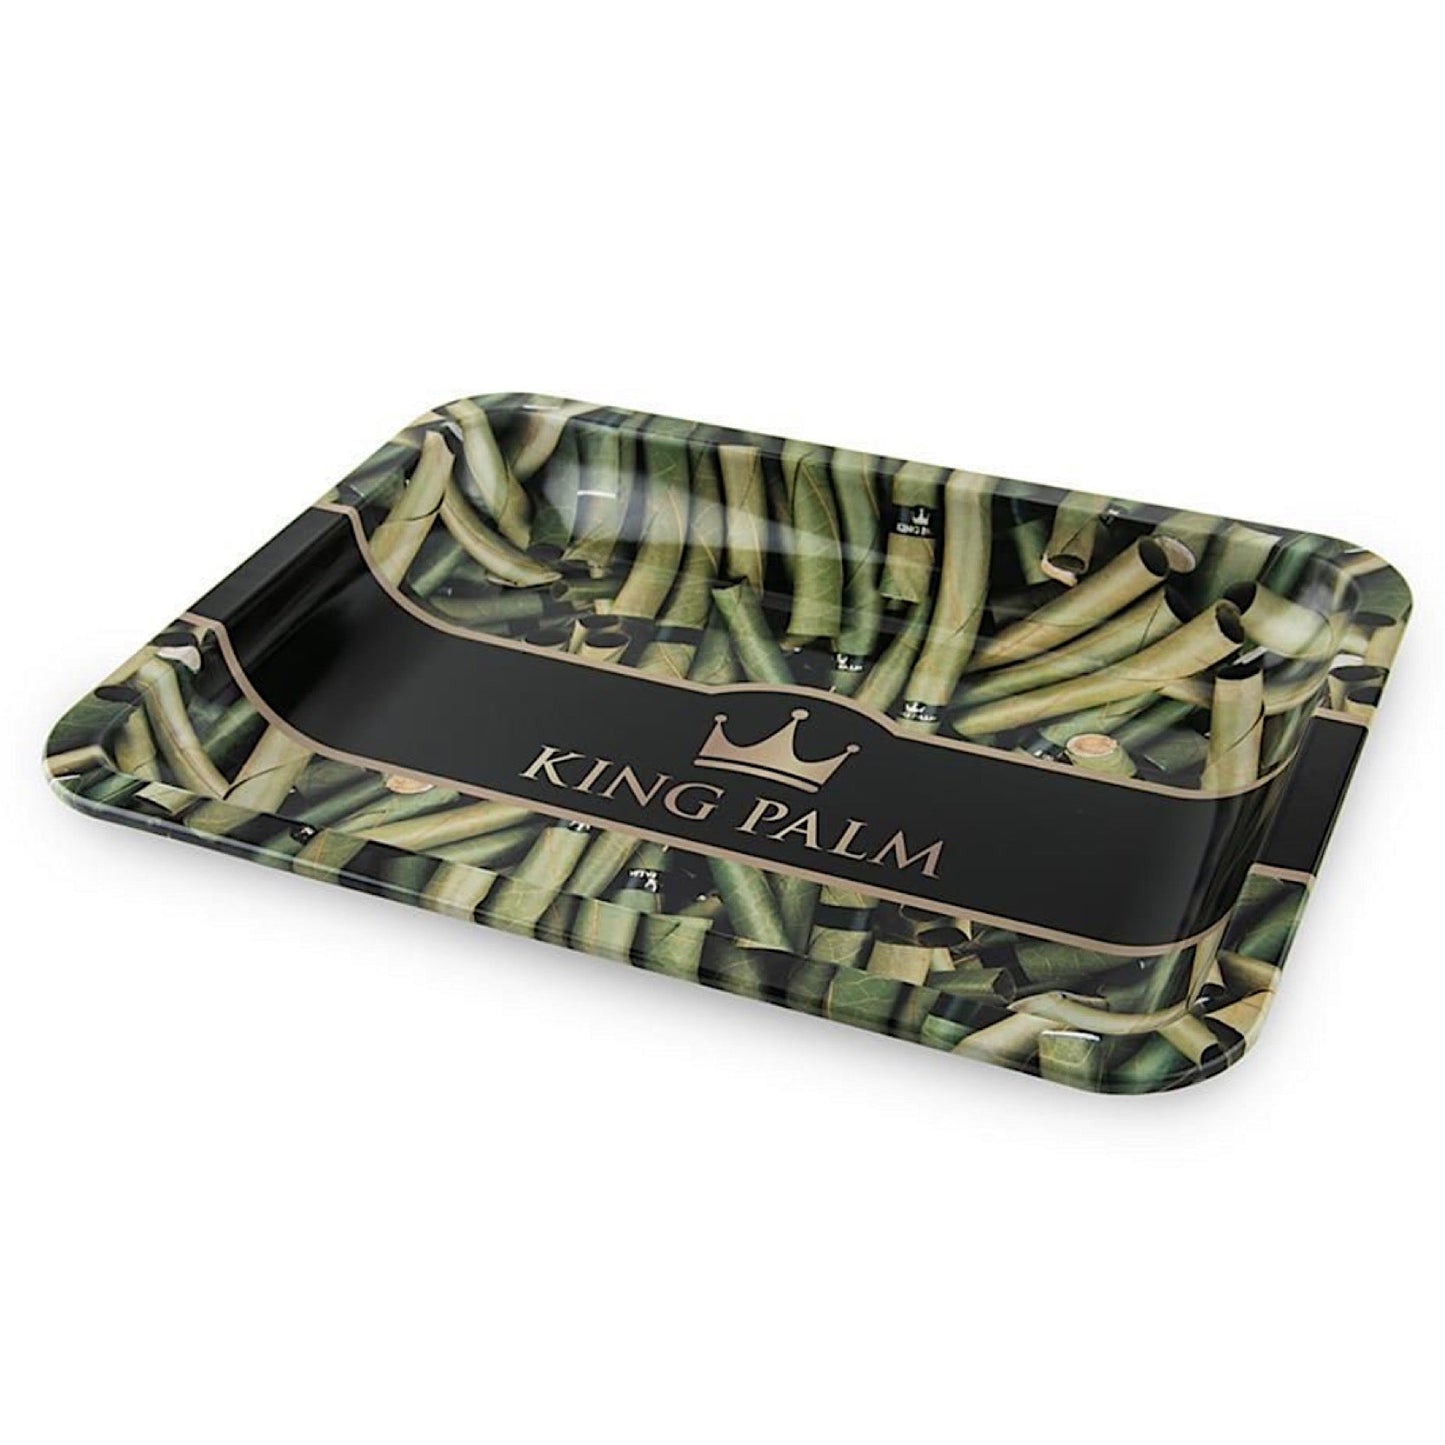 King Palm Royal Party Medium Metal Rolling Tray (8 x 10) by King Palm | Mission Dispensary